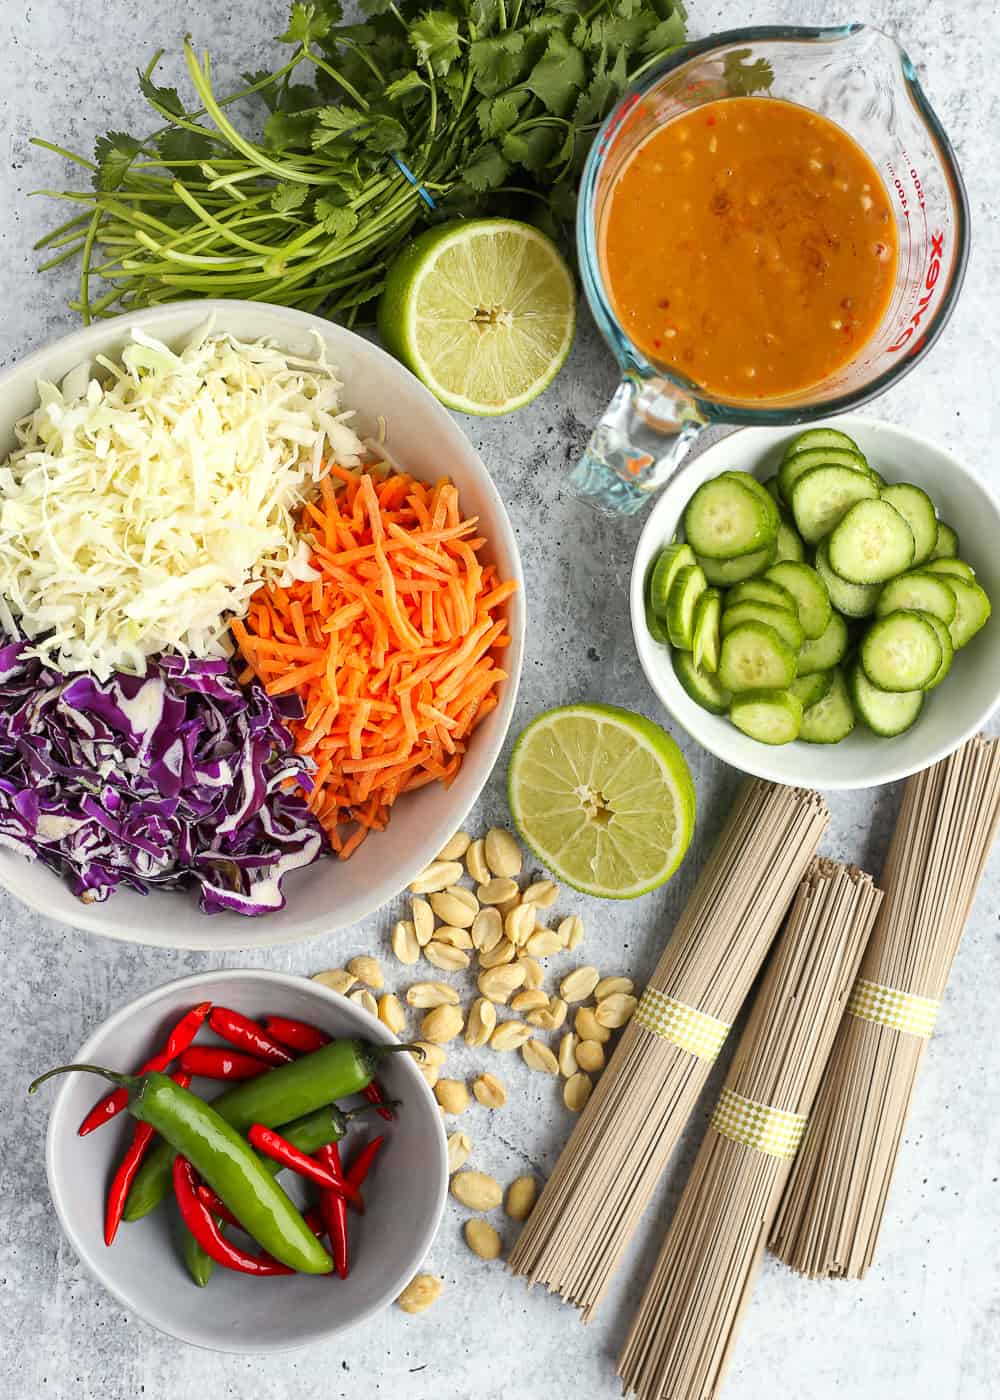 An overhead view of shredded cabbage and carrots in a large bowl, sliced cucumbers in a smaller bowl, peanut sauce in a measuring cup, and additional ingredients surrounding the dishes on a light grey countertop